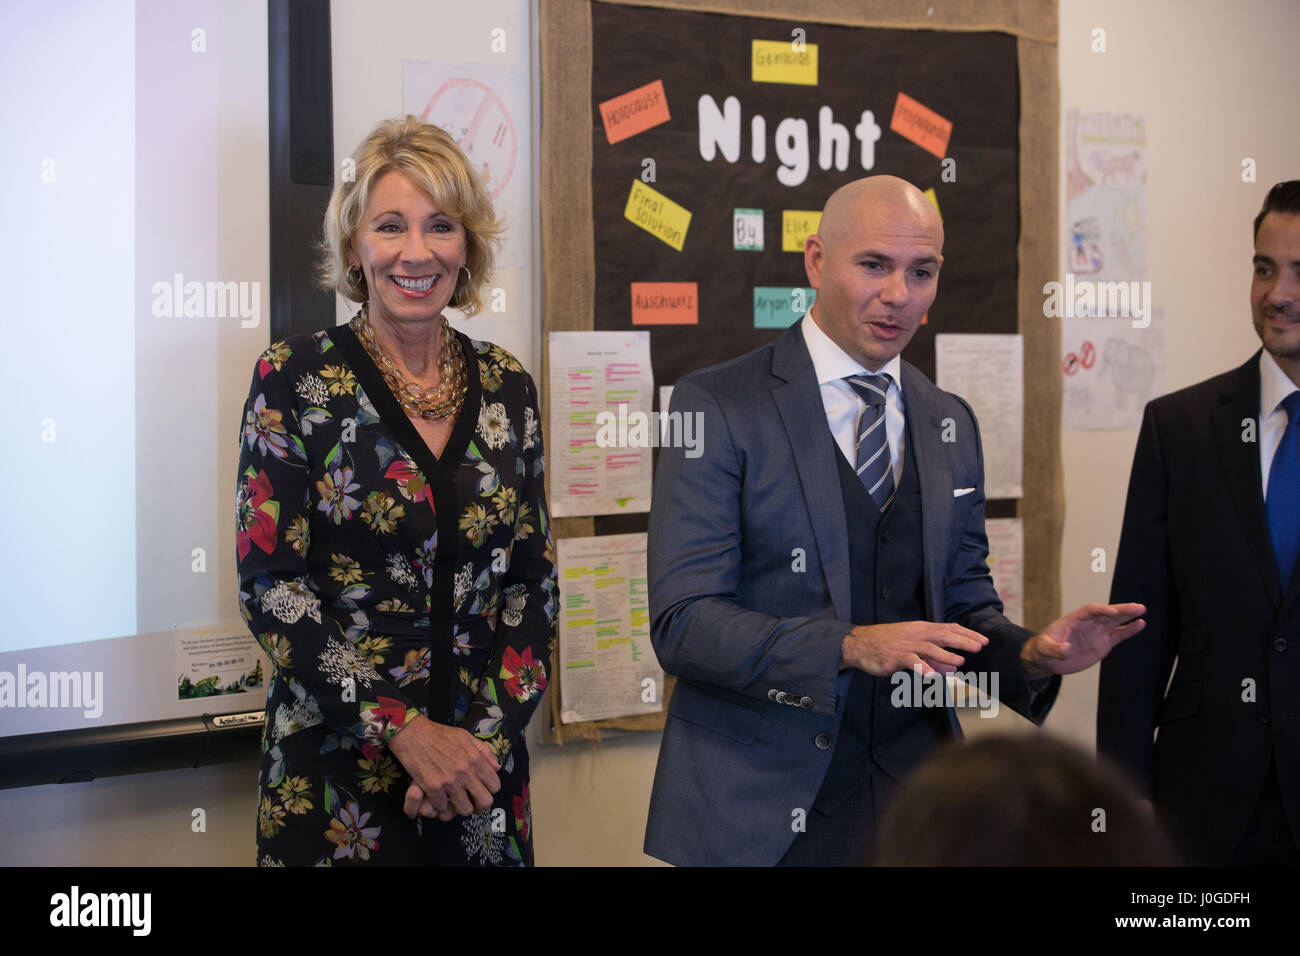 U.S. Secretary of Education Betsy DeVos, left, during a classroom visit with with the rapper Pitbull at the SLAM  charter school he supports in Little Havana April 6, 2017 in Miami, Florida. The controversial education secretary made several stops including her first visit to a public university, a private christian school and the charter school. Stock Photo